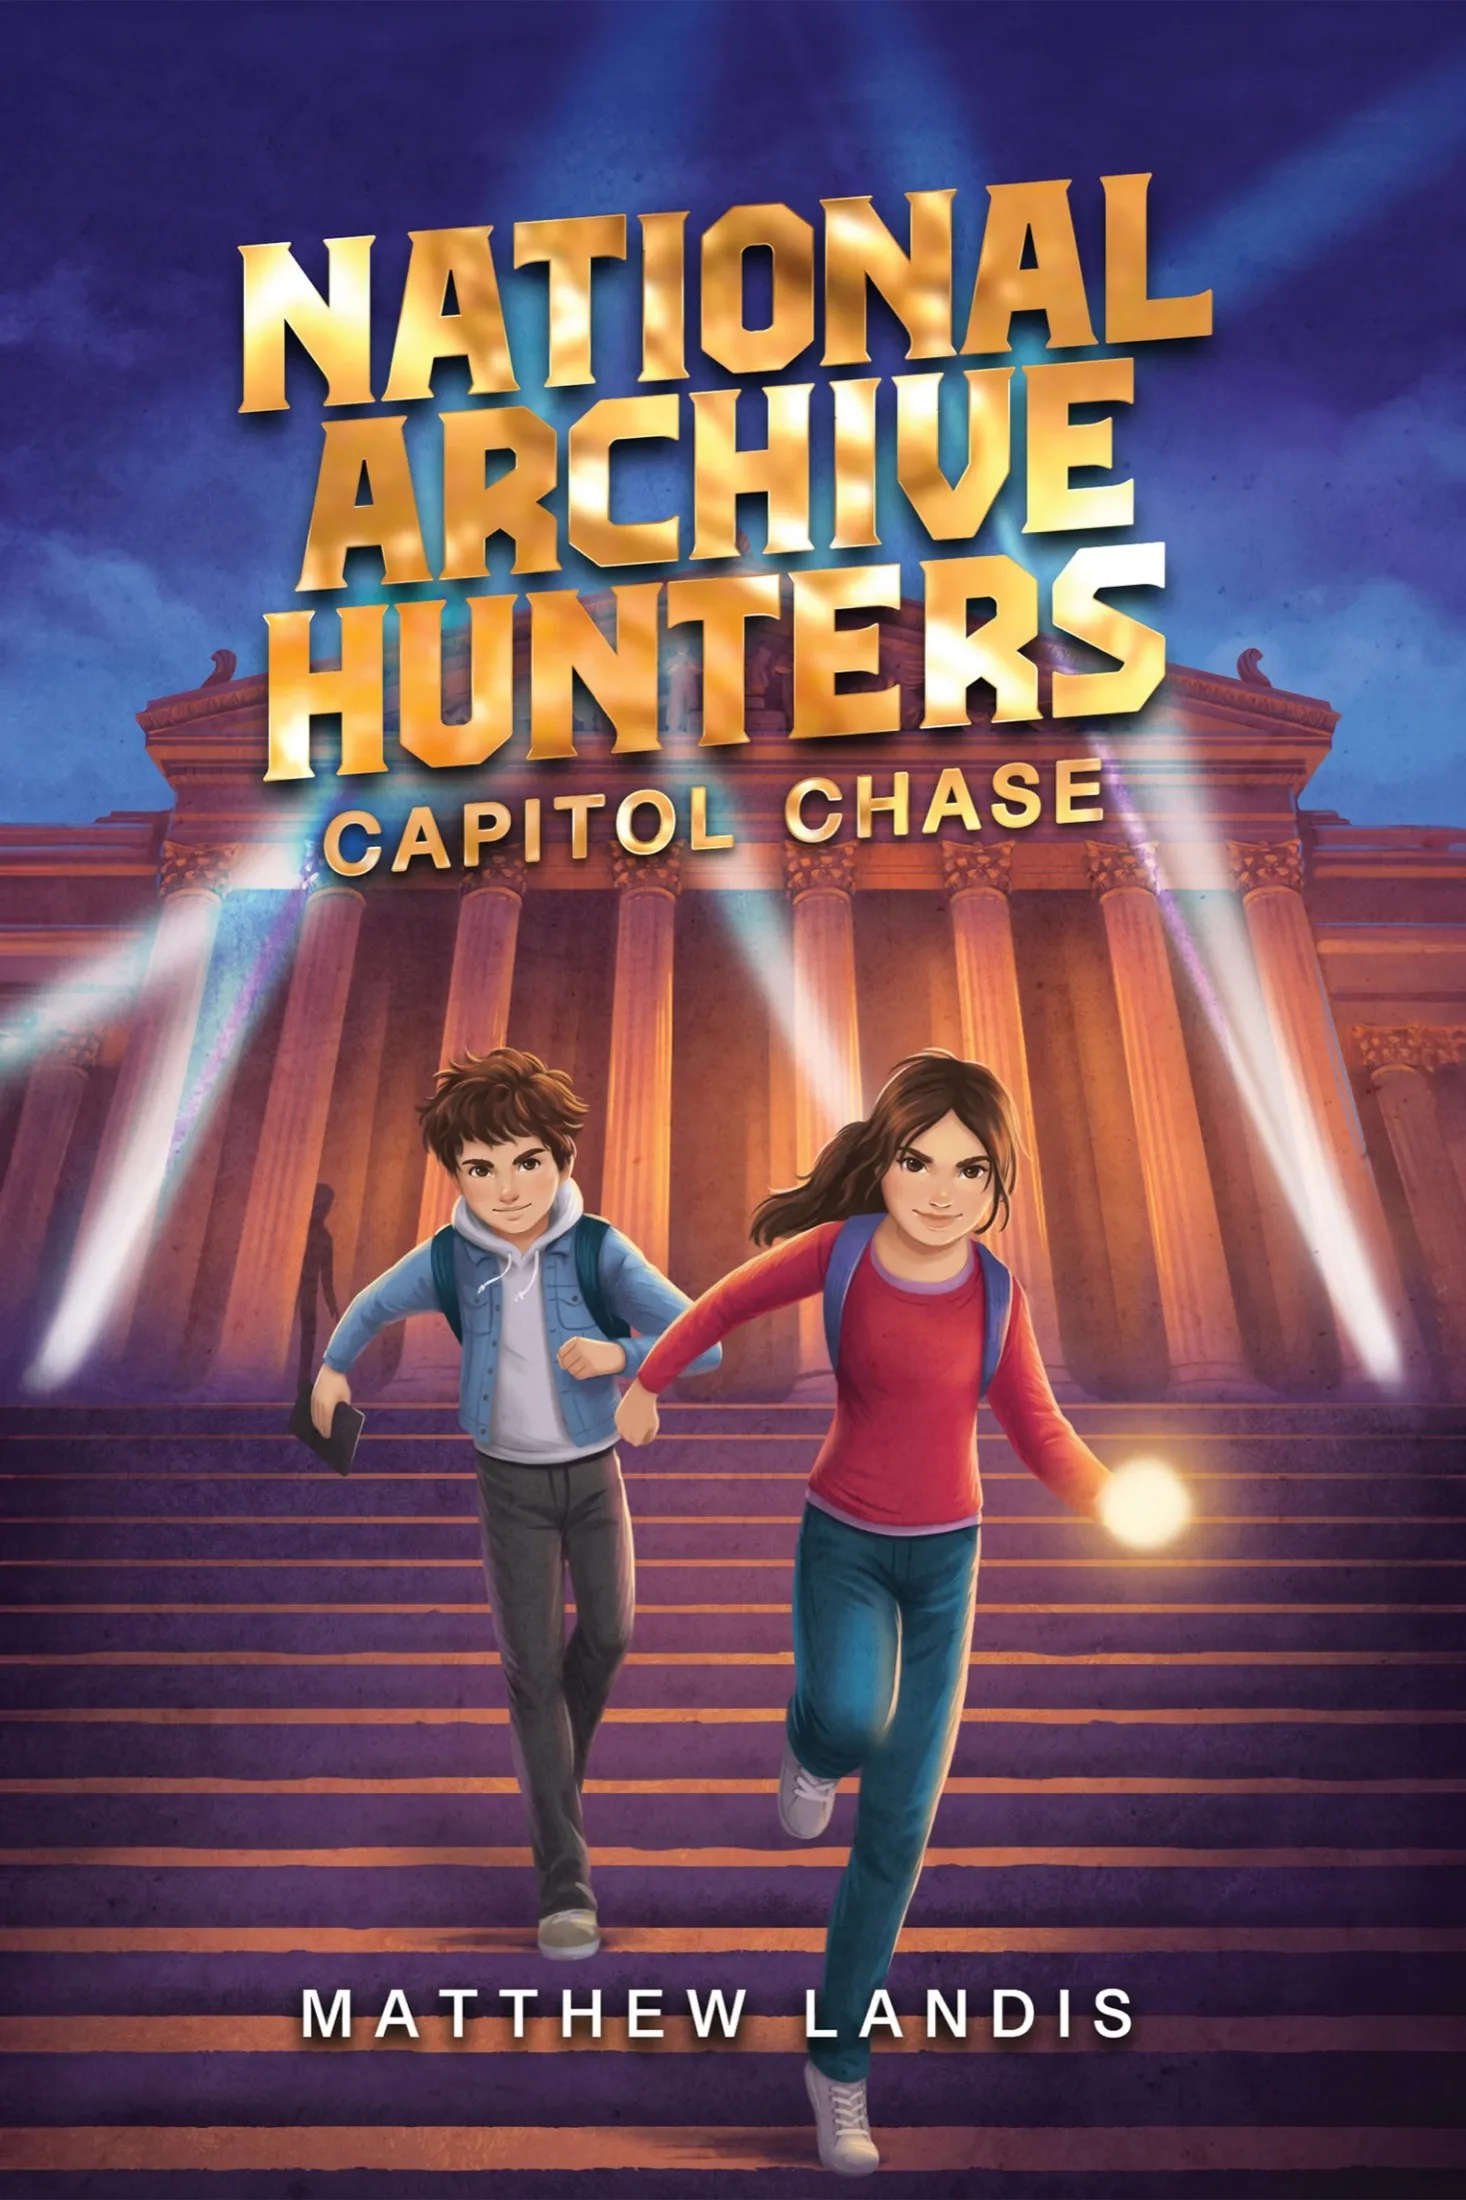 Capitol Chase (National Archive Hunters #1)